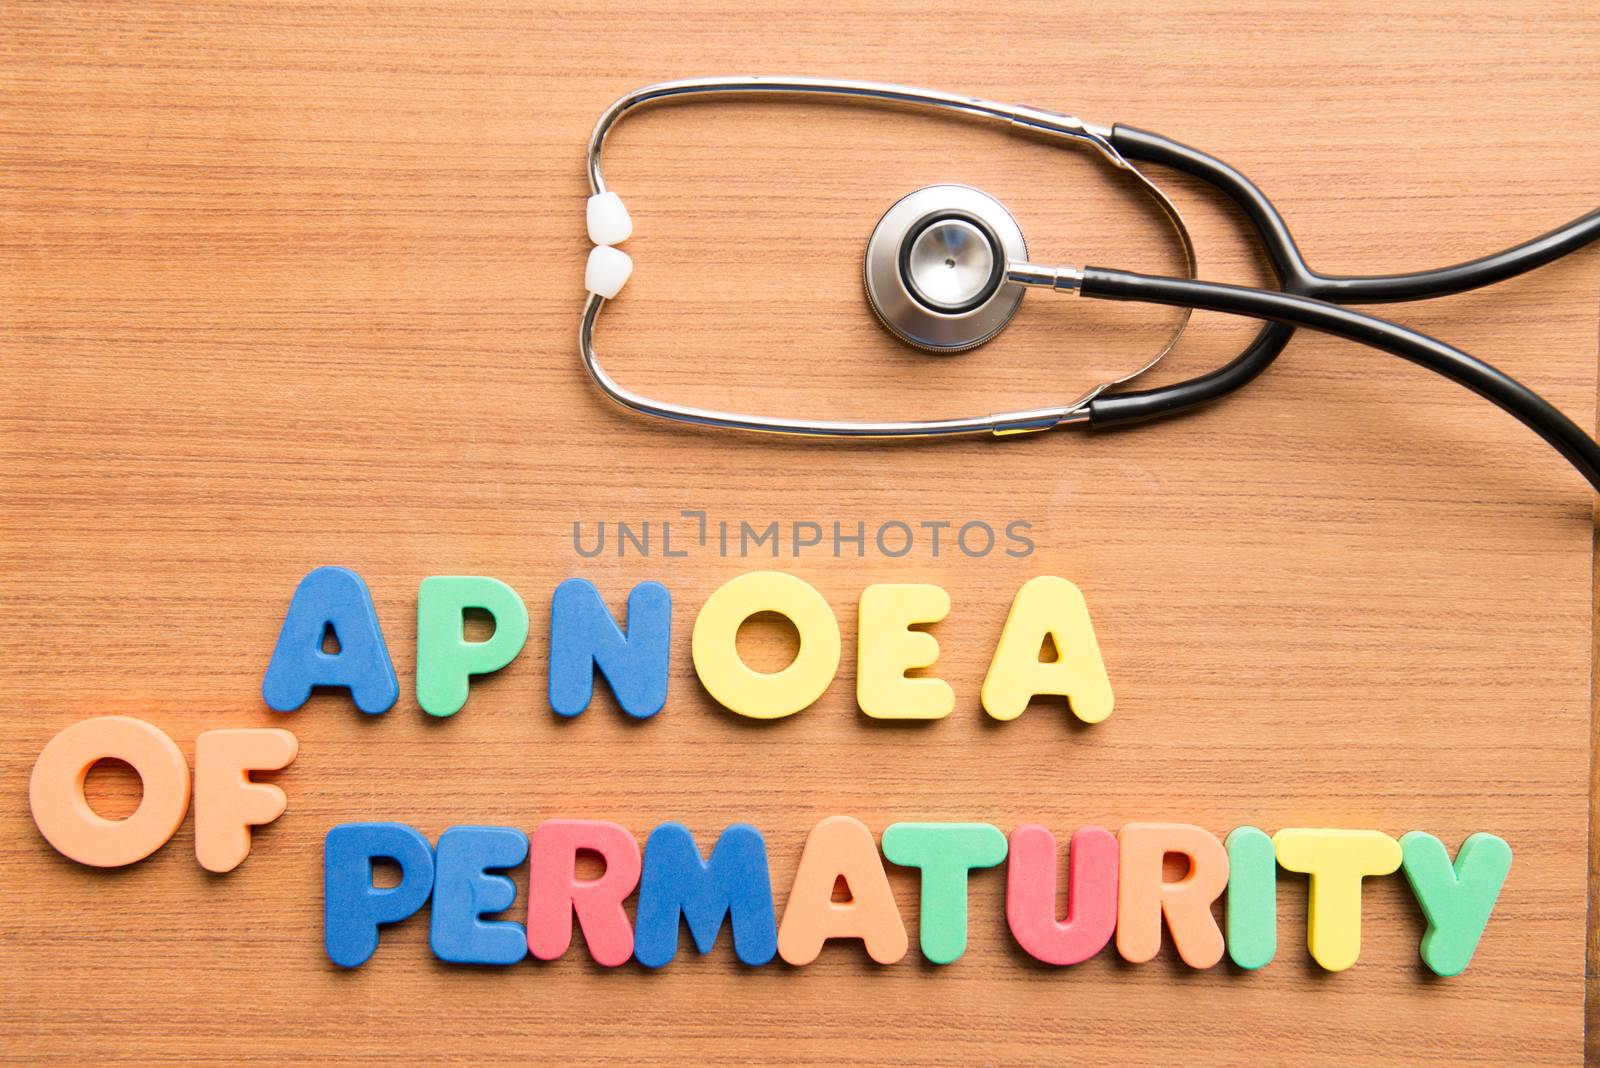 Apnoea of prematurity colorful word with stethoscope on the wooden background